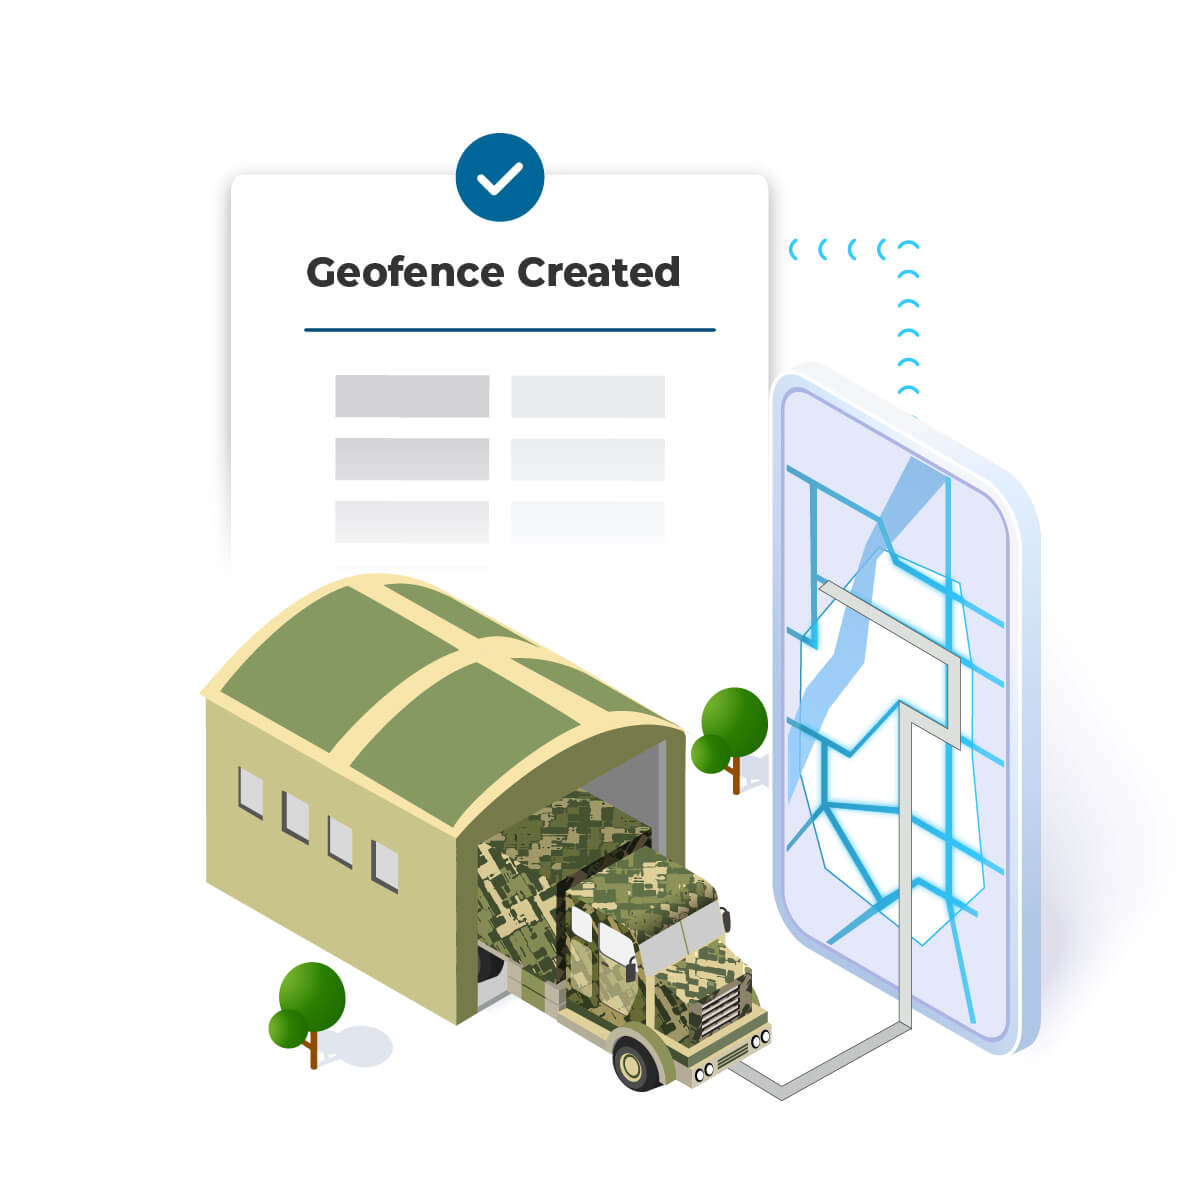 geofence created for army vehicle on an army base with asset management tracking